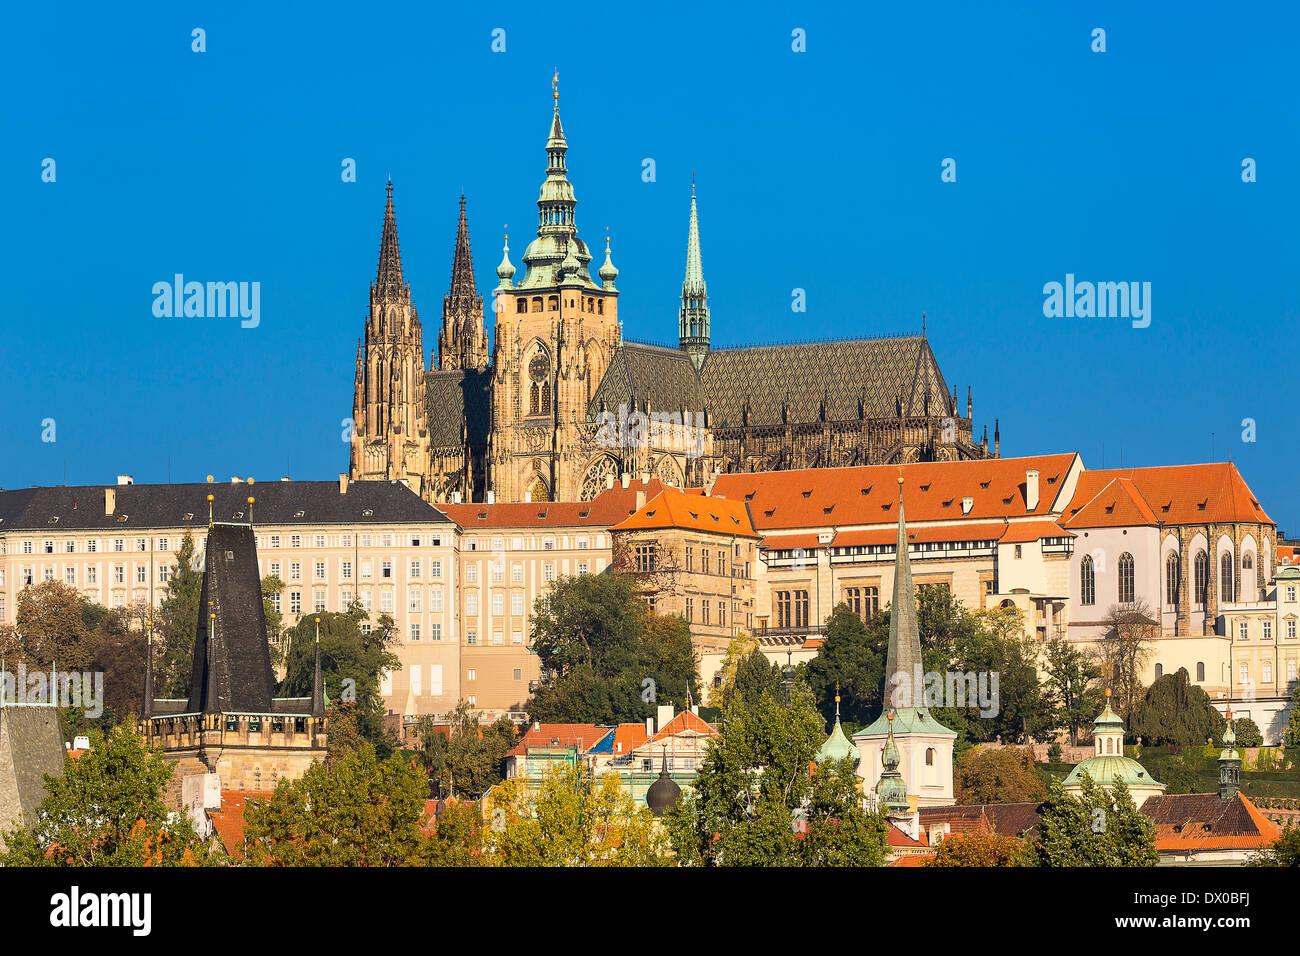 St Vitus's Cathedral and Castle of Prague Stock Photo